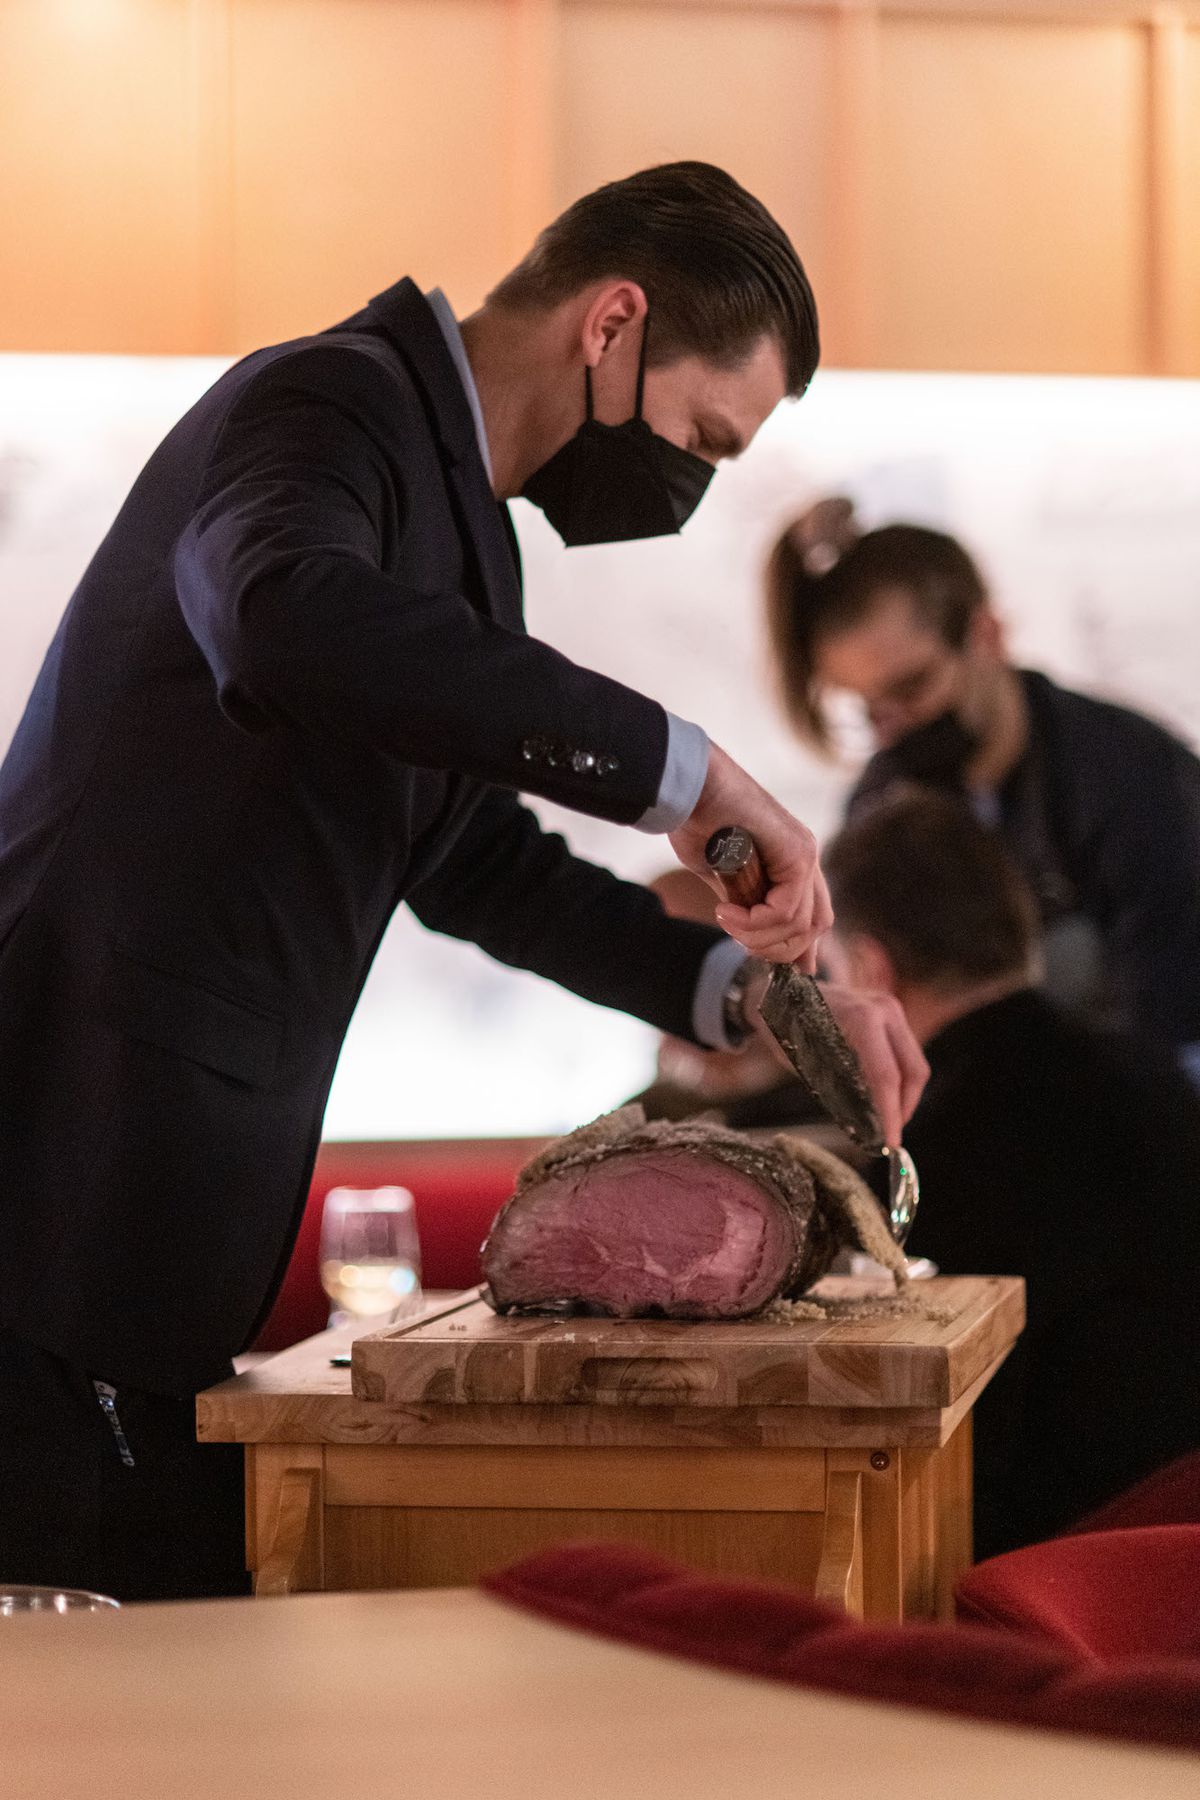 A server cuts prime rib from a full rack at a dining room tableside preparation.